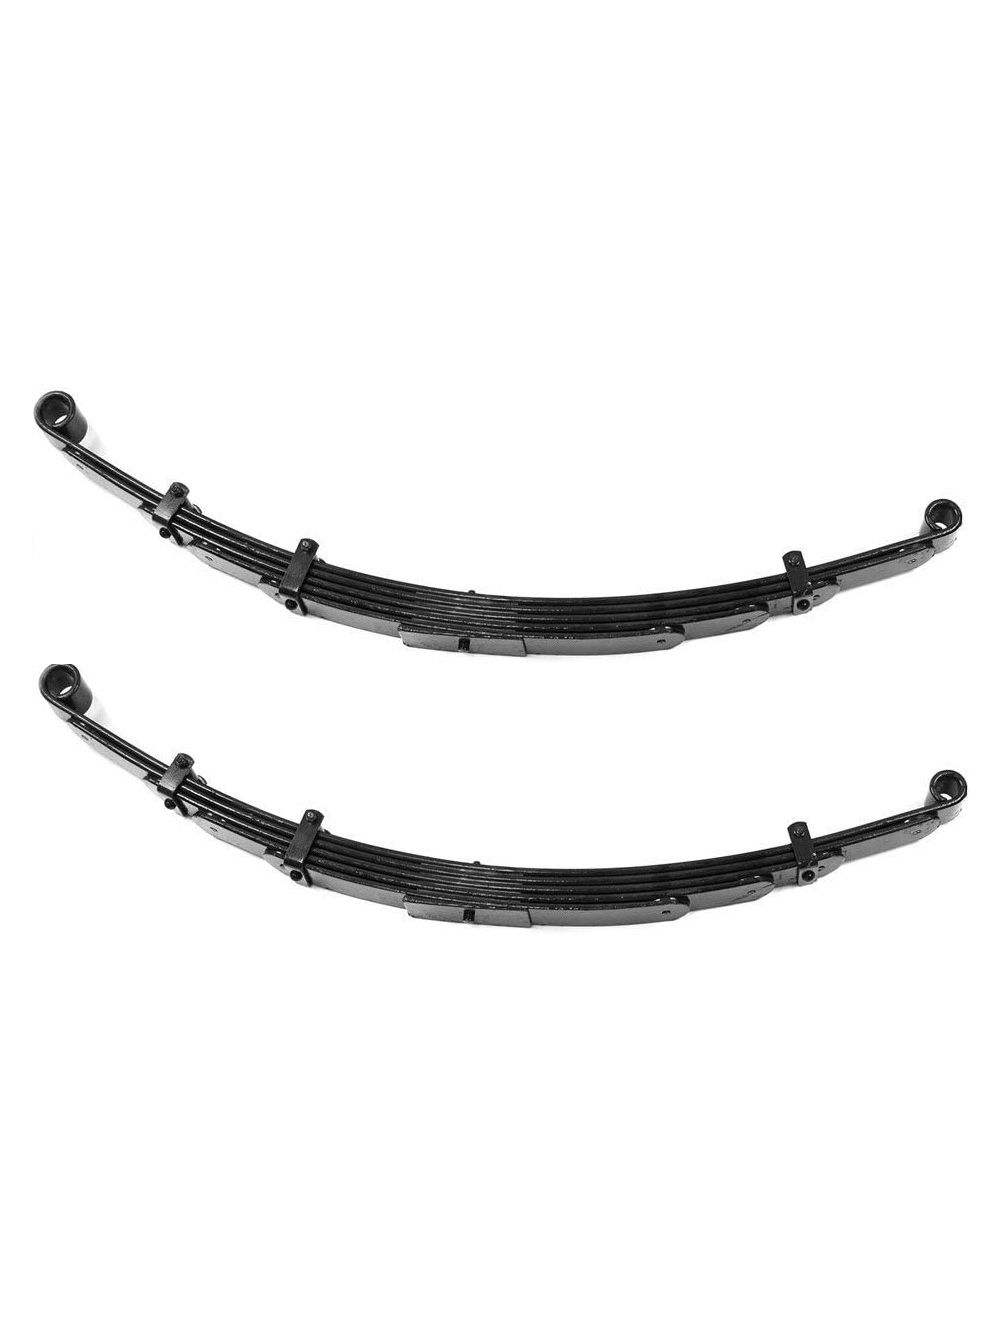 SuperLift 6 Suspension Lift Kit for 1973-1991 Chevy/GMC 3/4 Ton 4WD Solid  Axle Vehicles